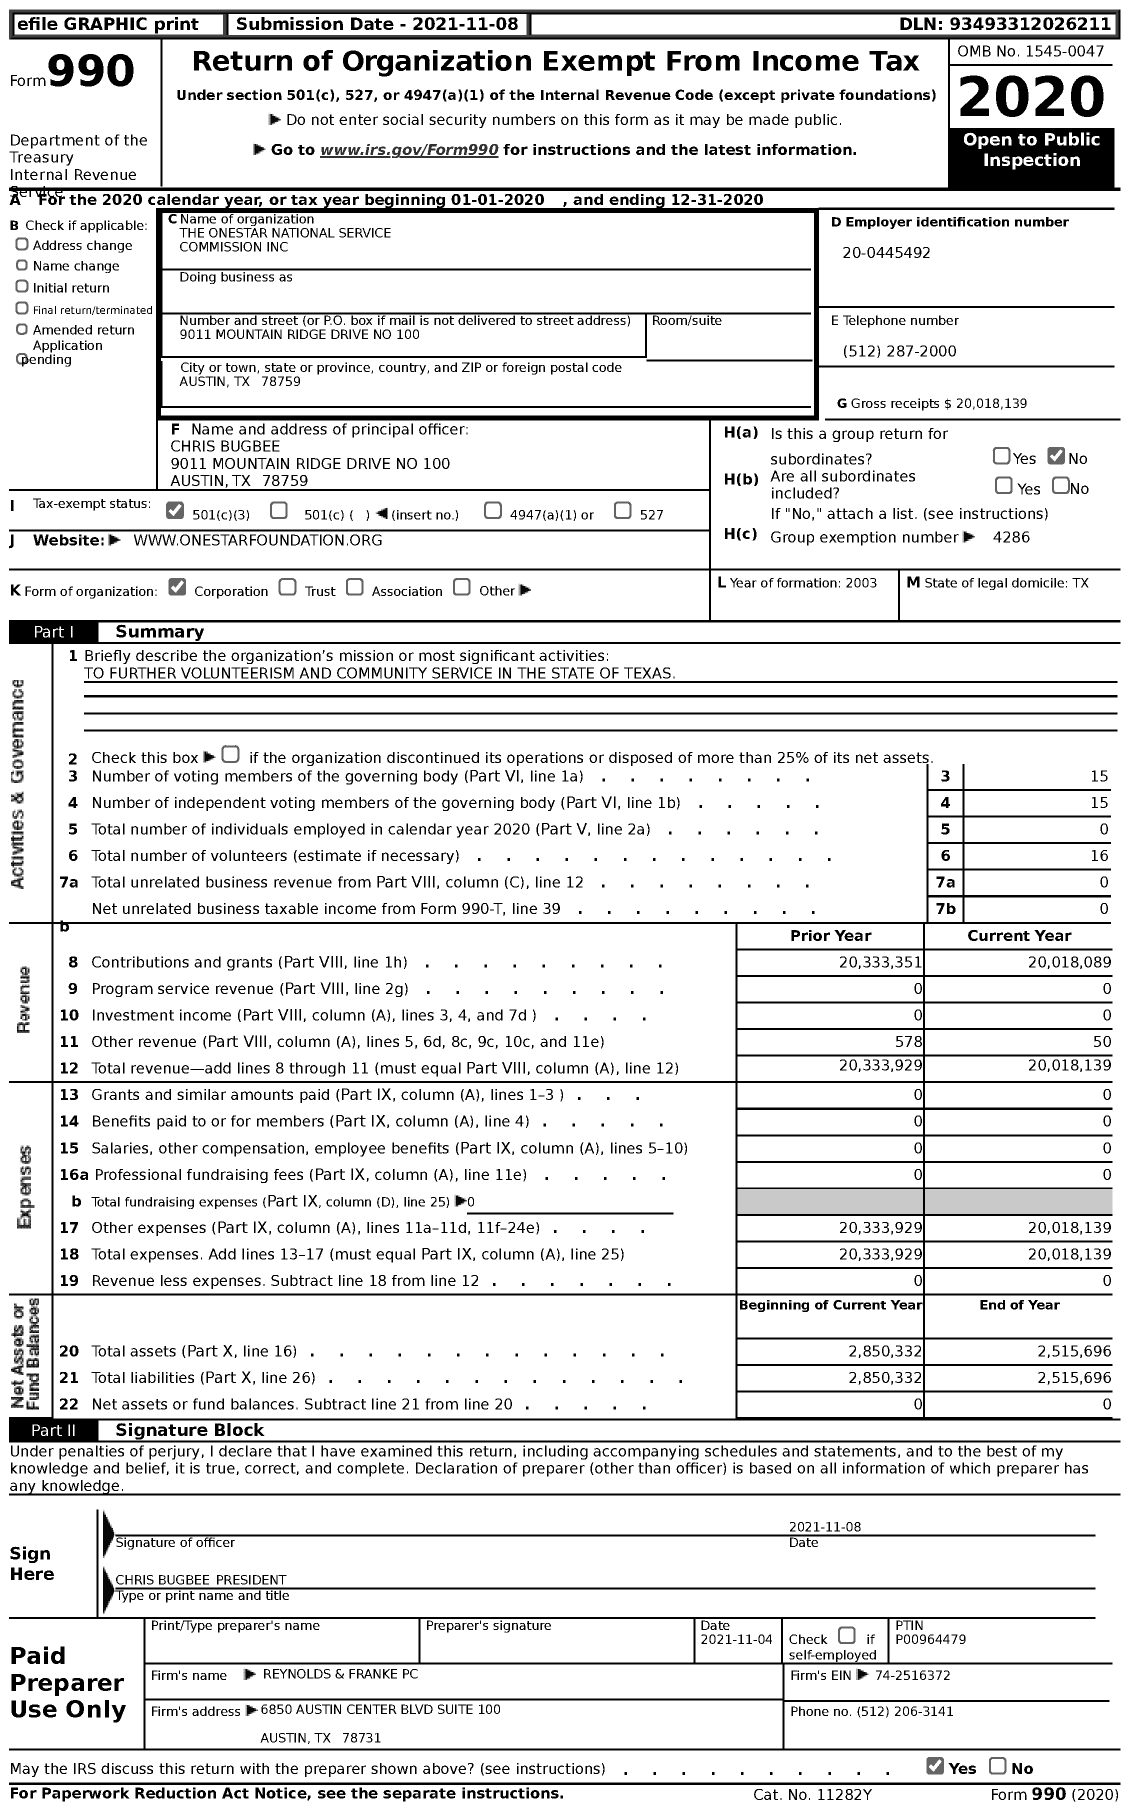 Image of first page of 2020 Form 990 for The Onestar National Service Commission